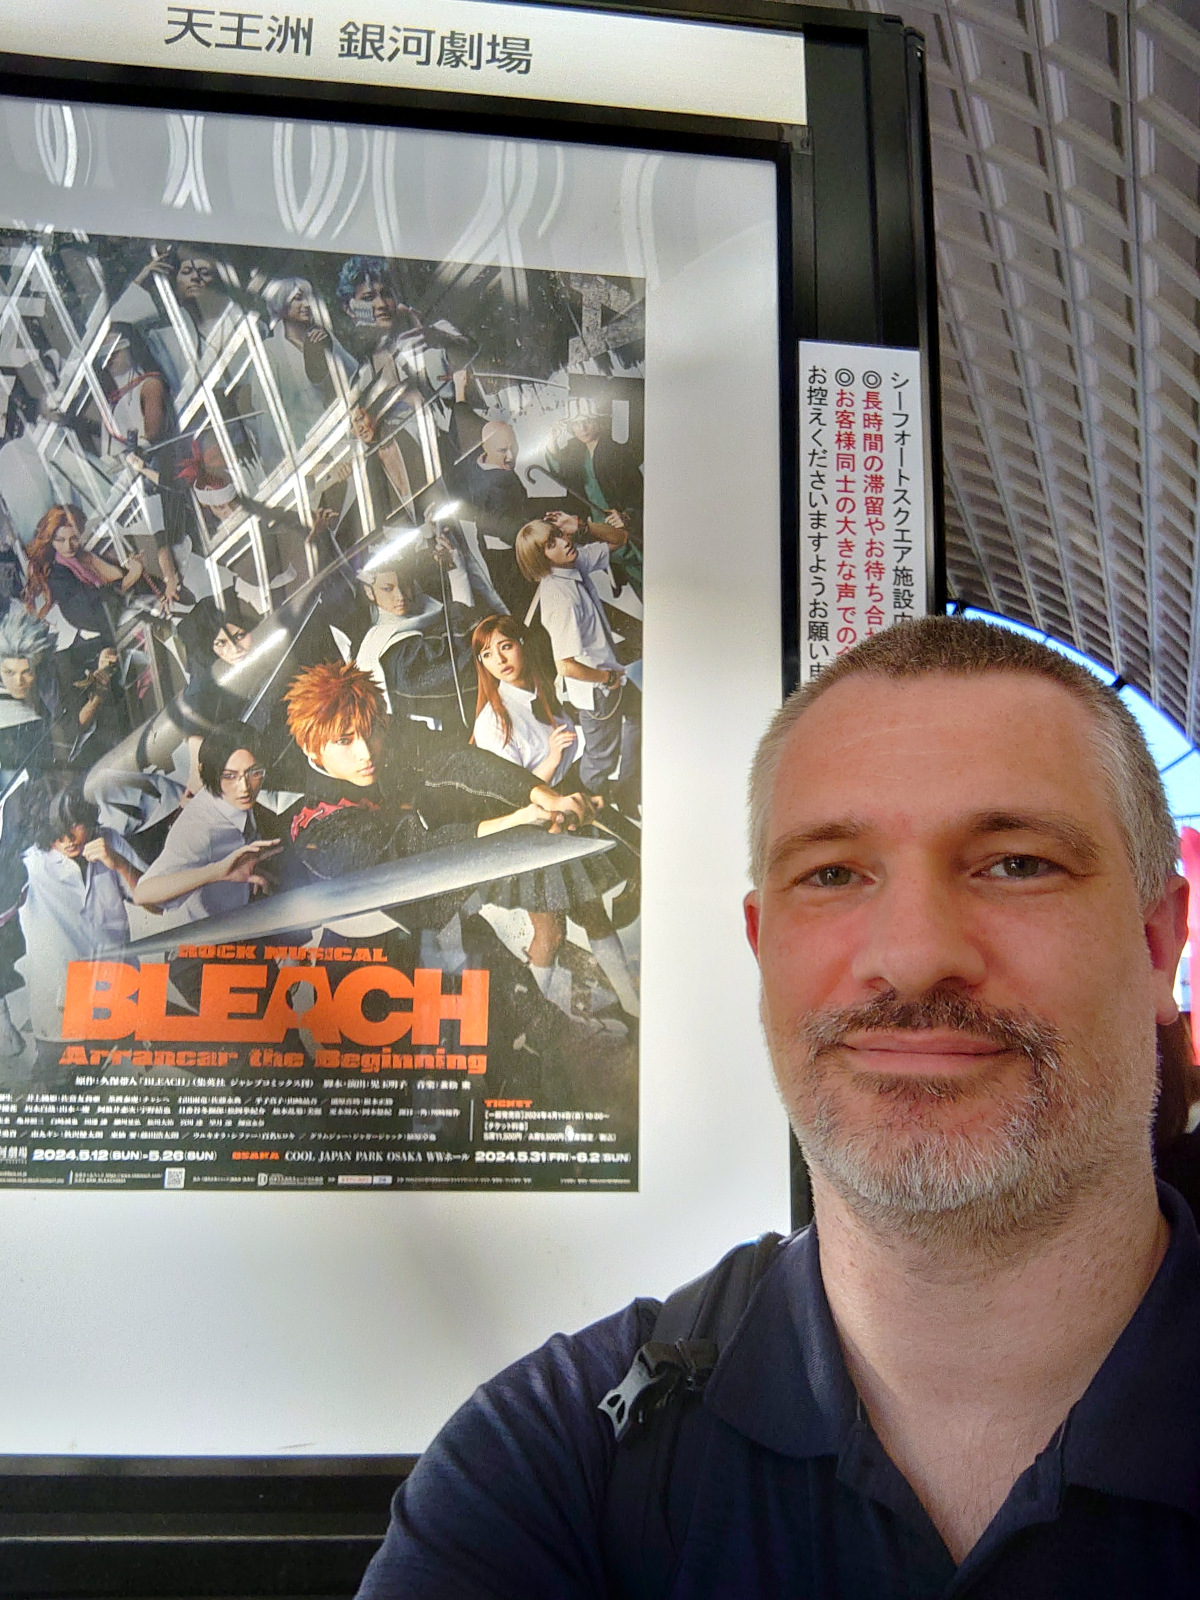 Rock Musical Bleach – Bankai On Stage For Manga Fans